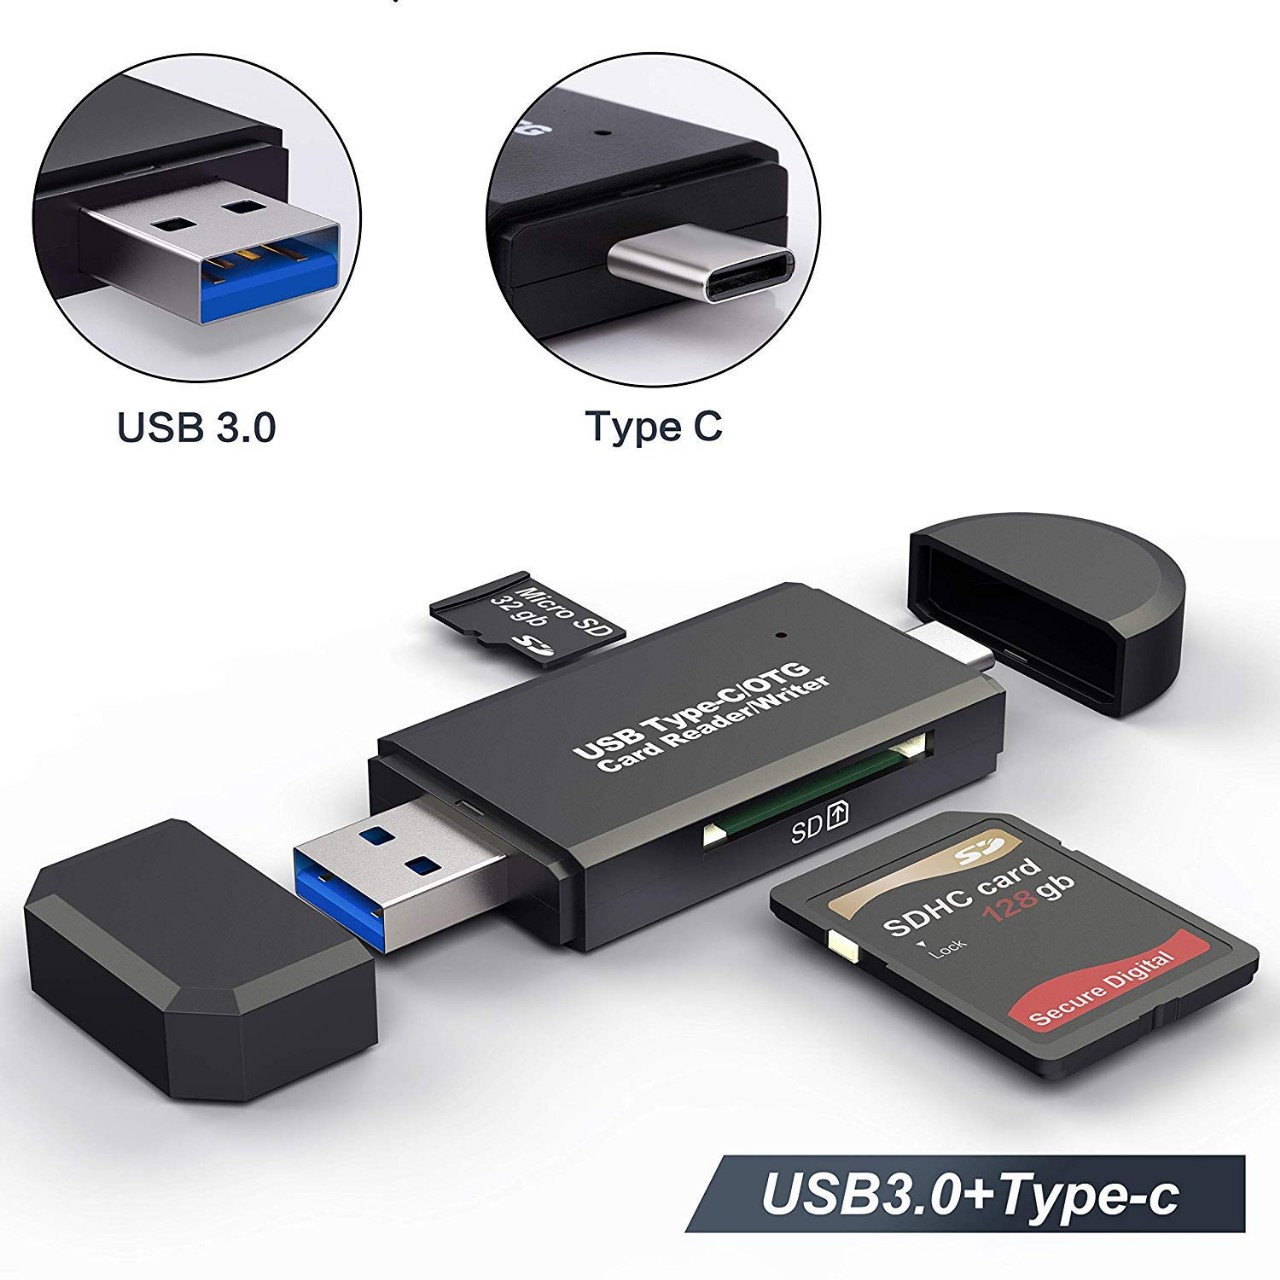 USB 3.0 SD Card Reader, USB Type C Memory Card Reader, OTG Adapter for SDXC, SDHC, SD, MMC, RS- MMC